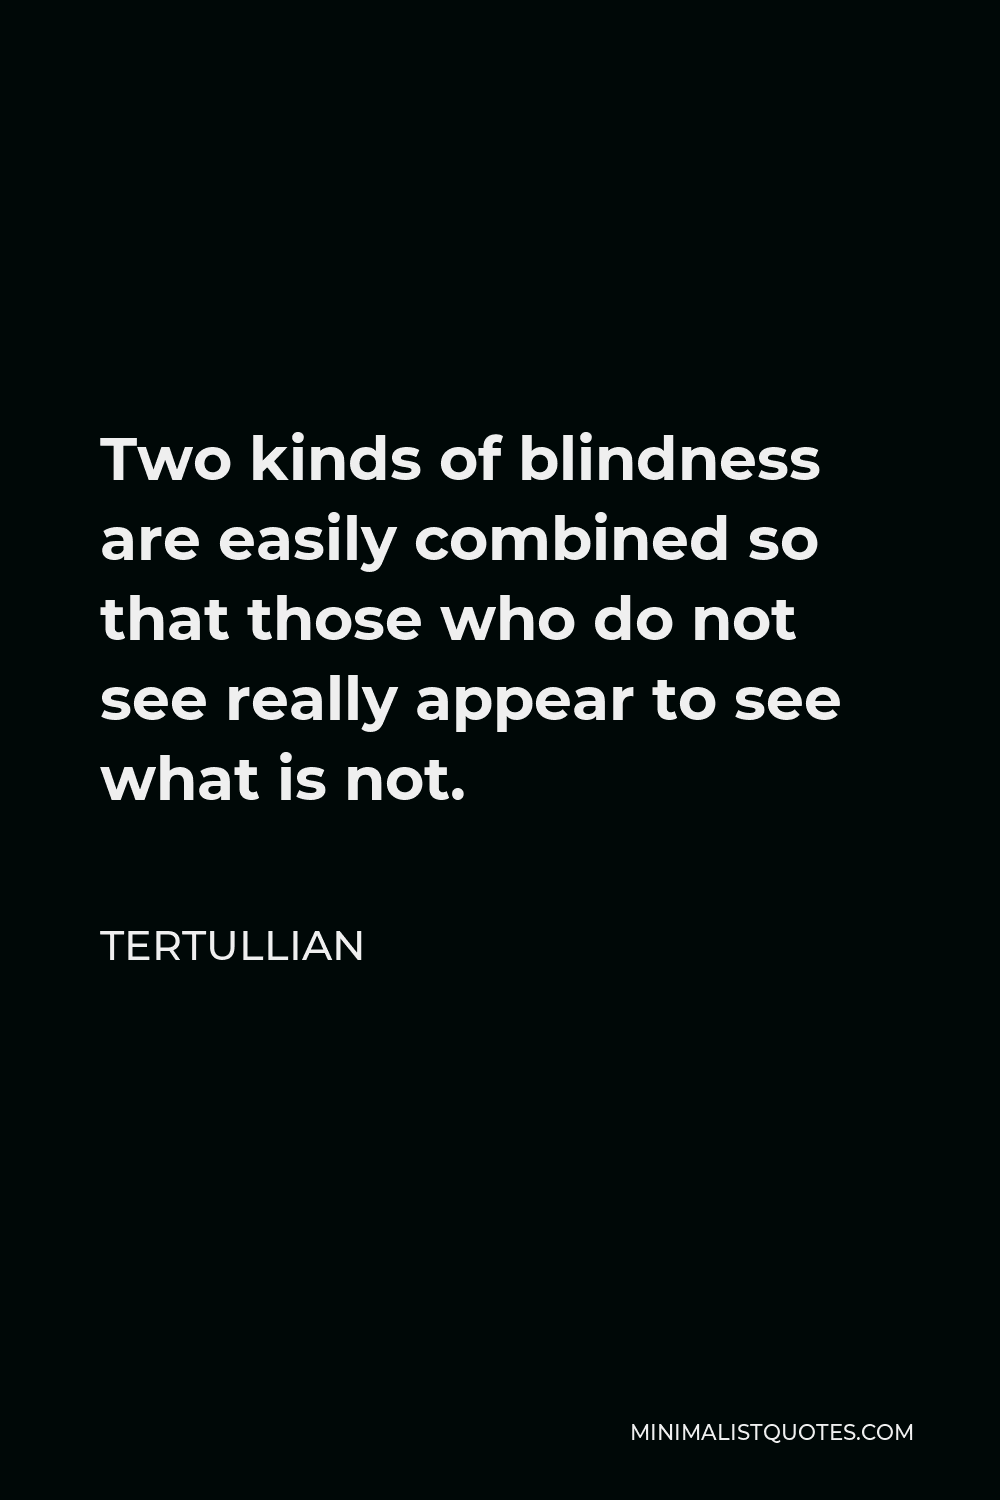 Tertullian Quote - Two kinds of blindness are easily combined so that those who do not see really appear to see what is not.